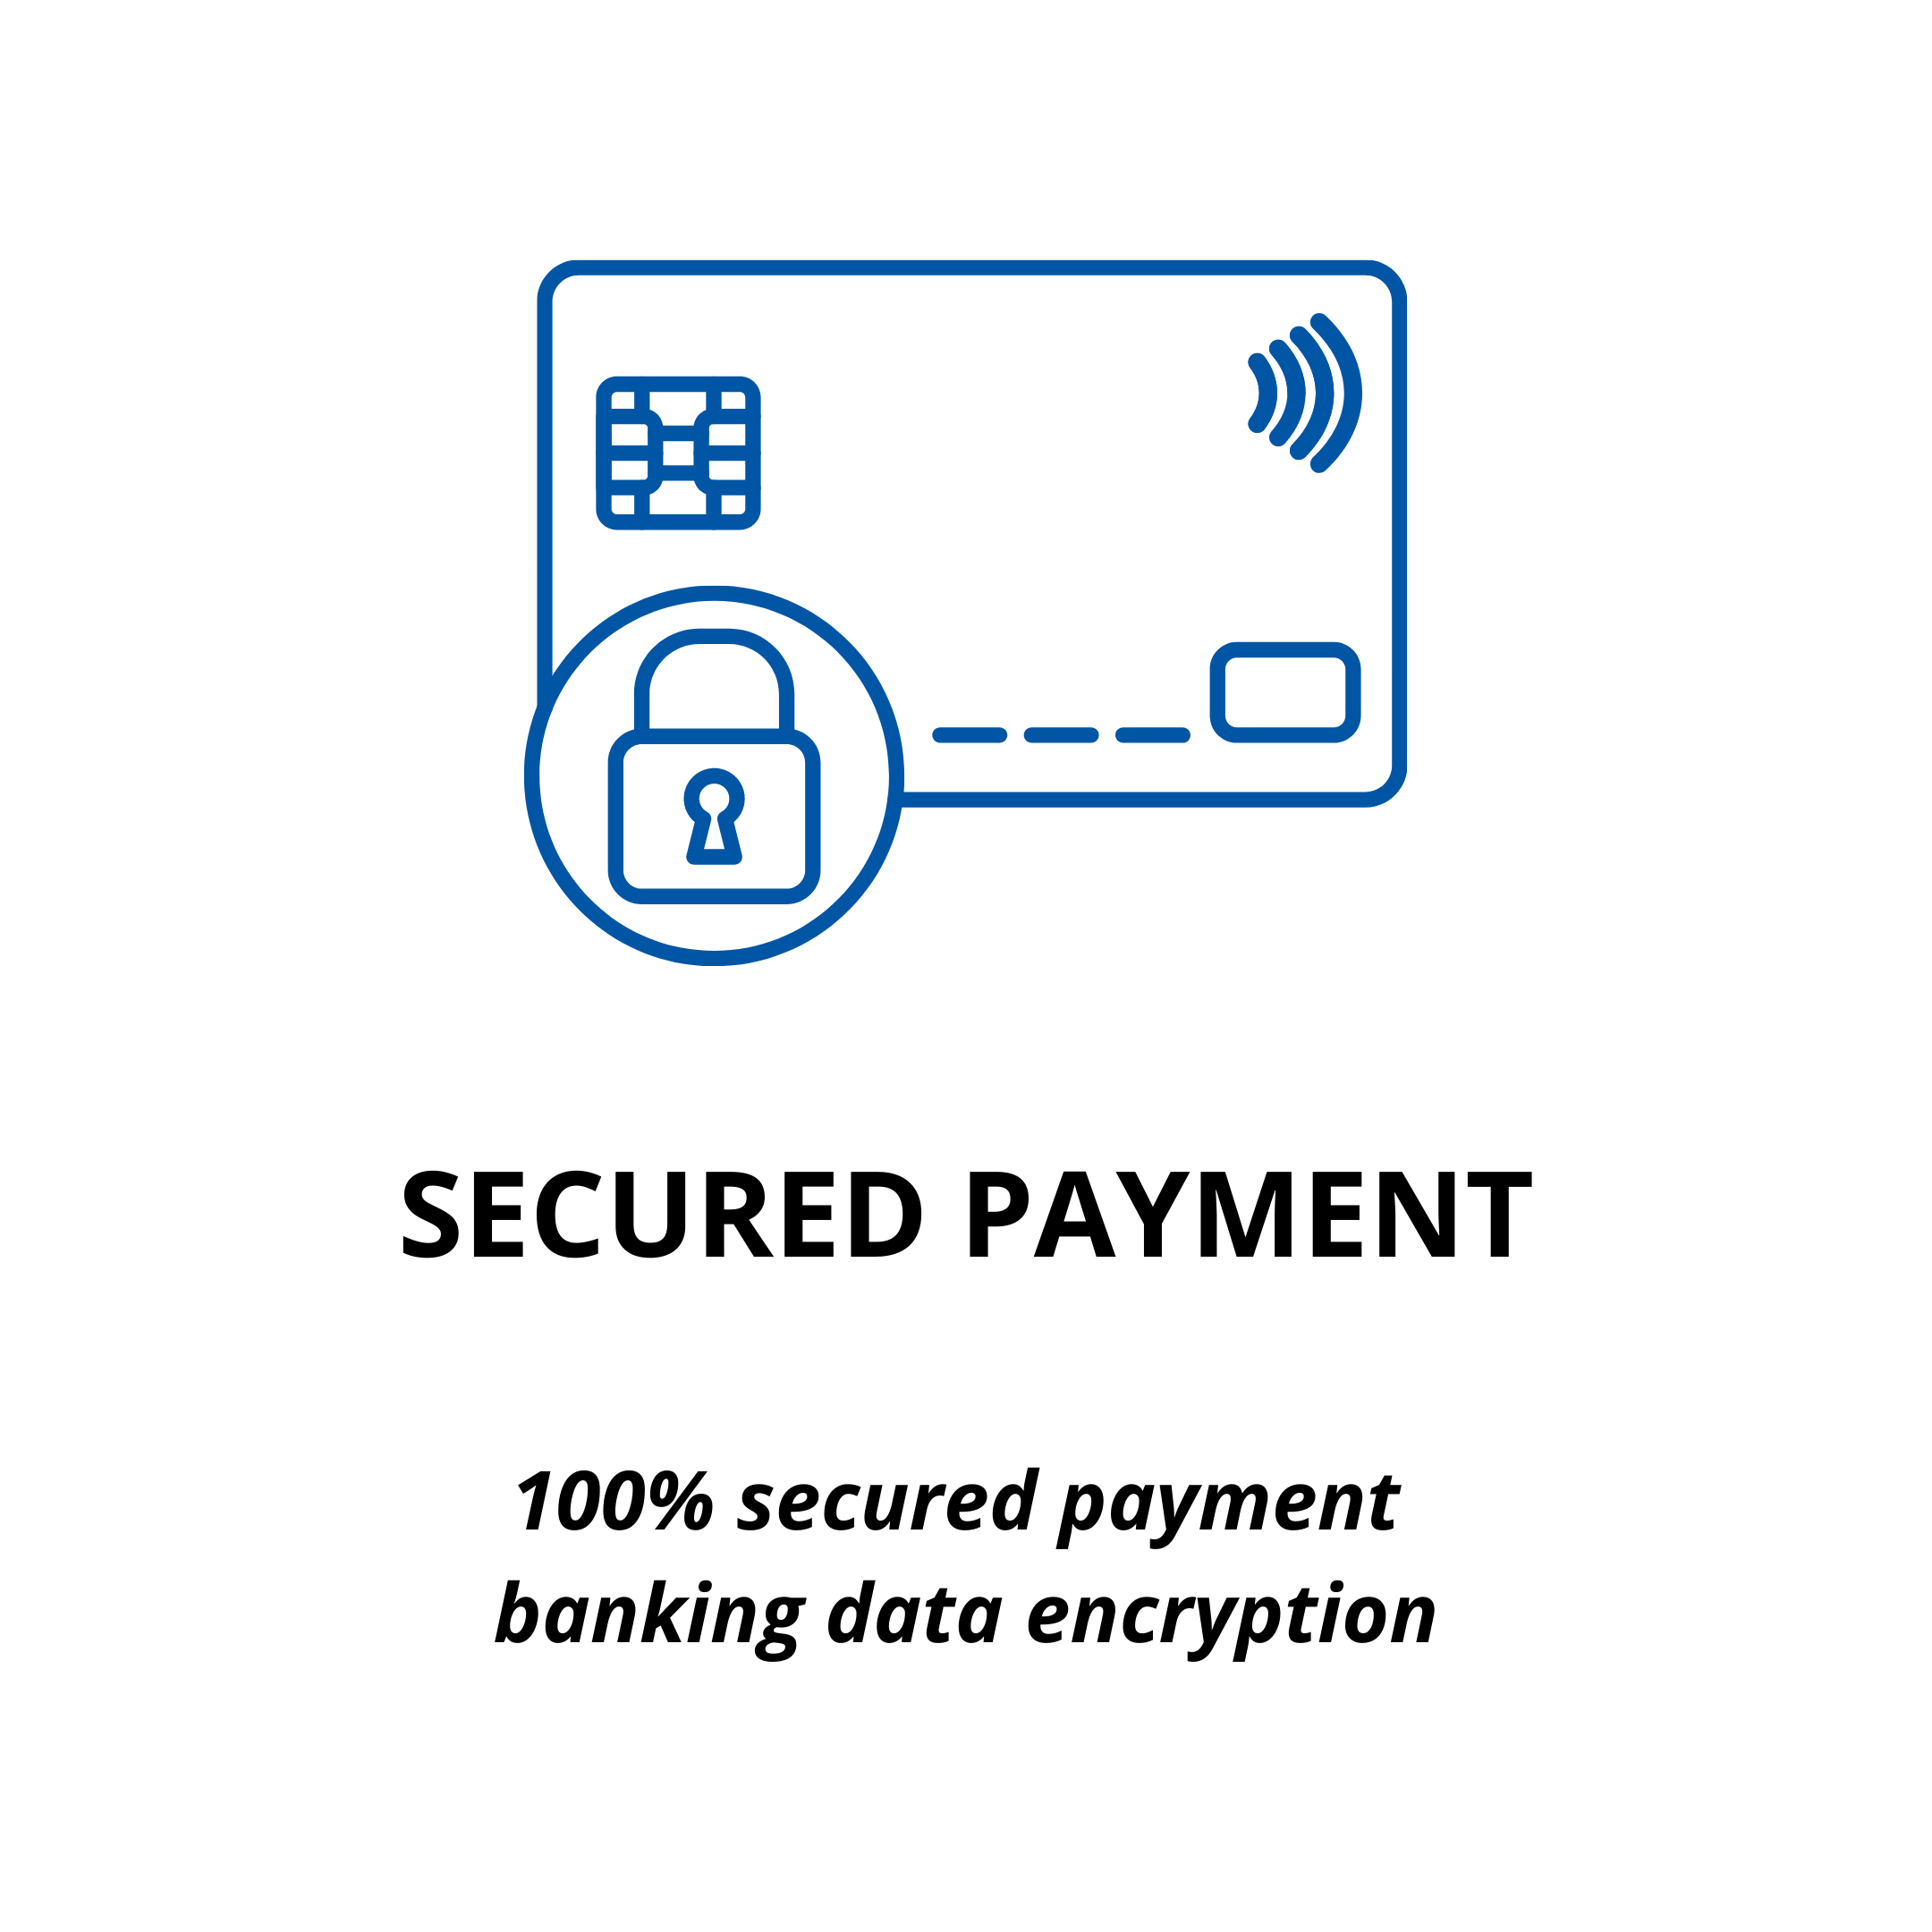 Secured payment